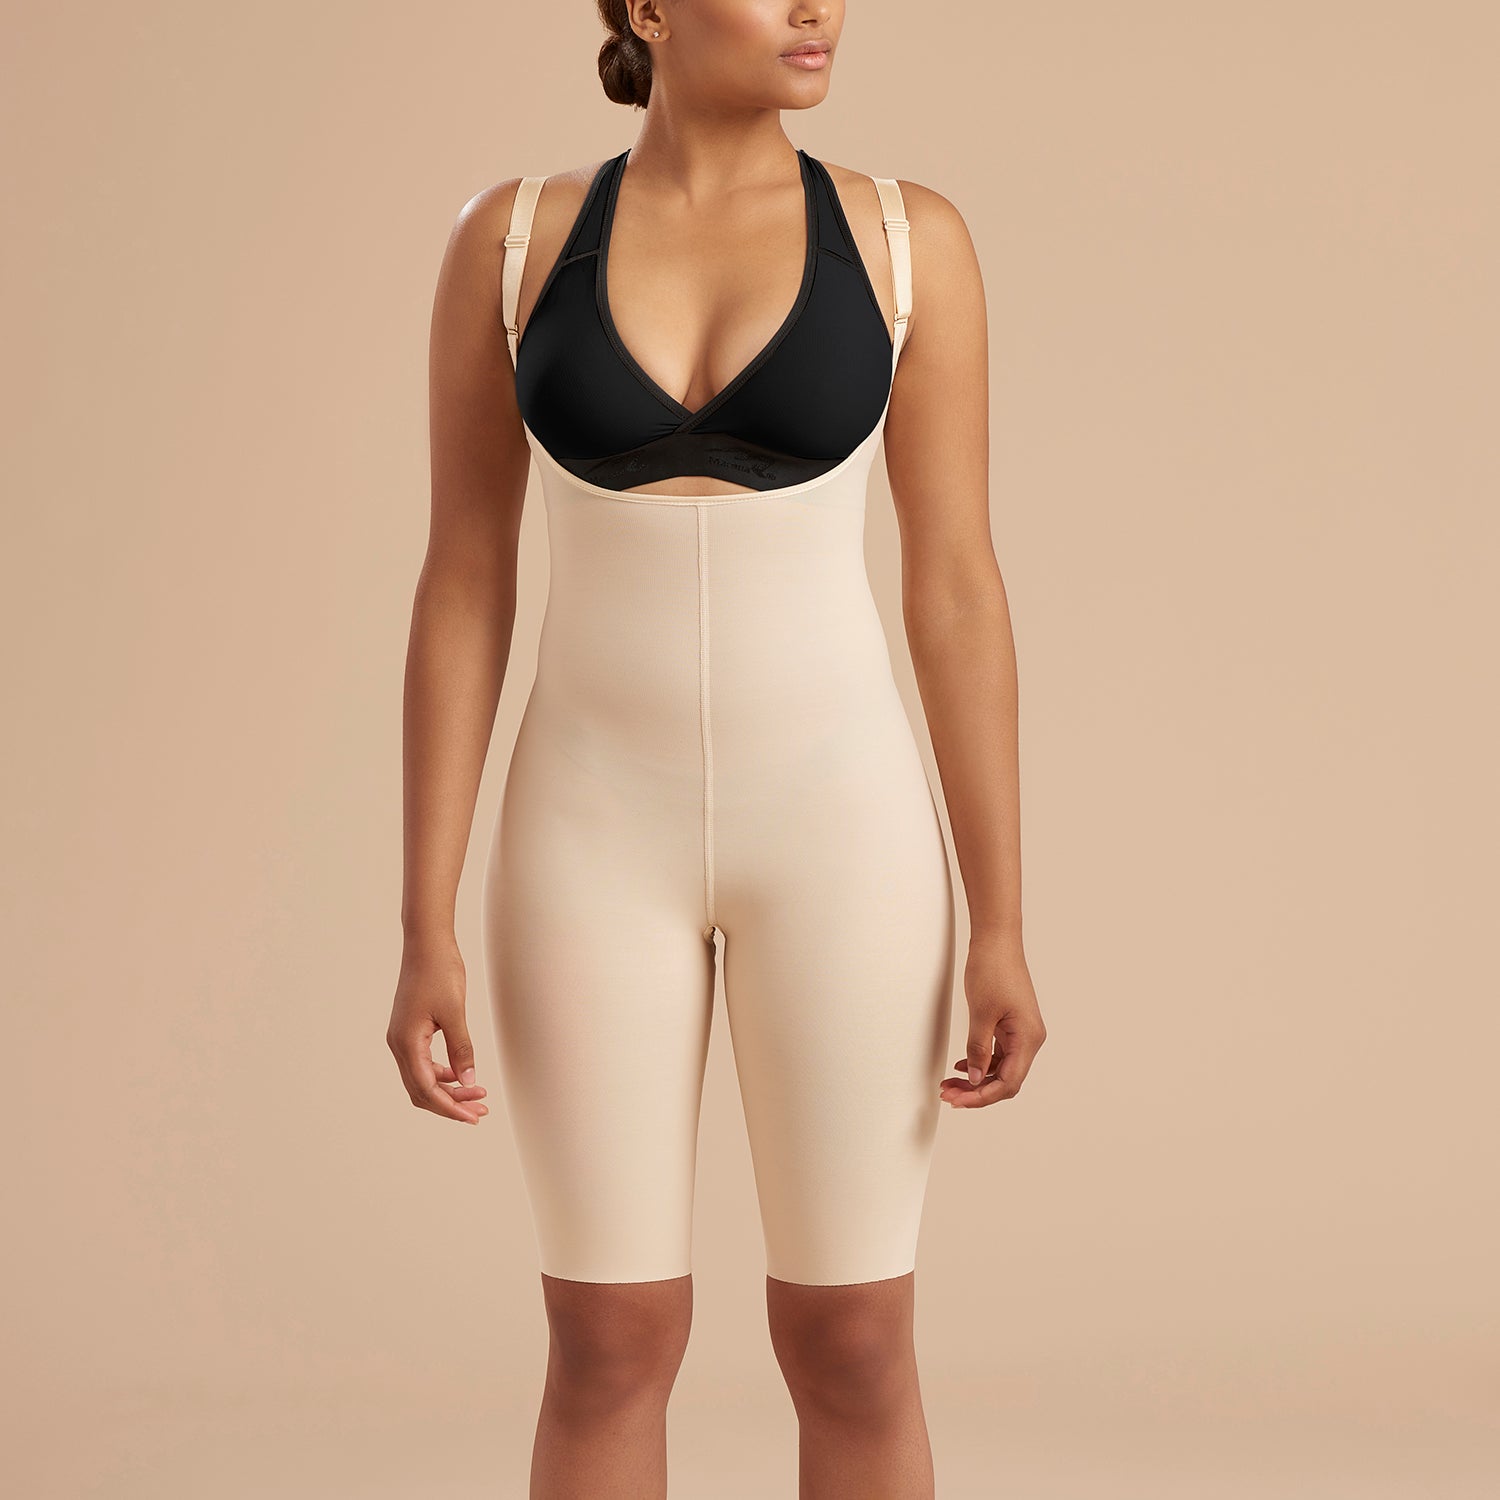 Stage 1 Liposuction Surgery Recovery Medical Compression Shapewear Bodysuit  with Sleeves